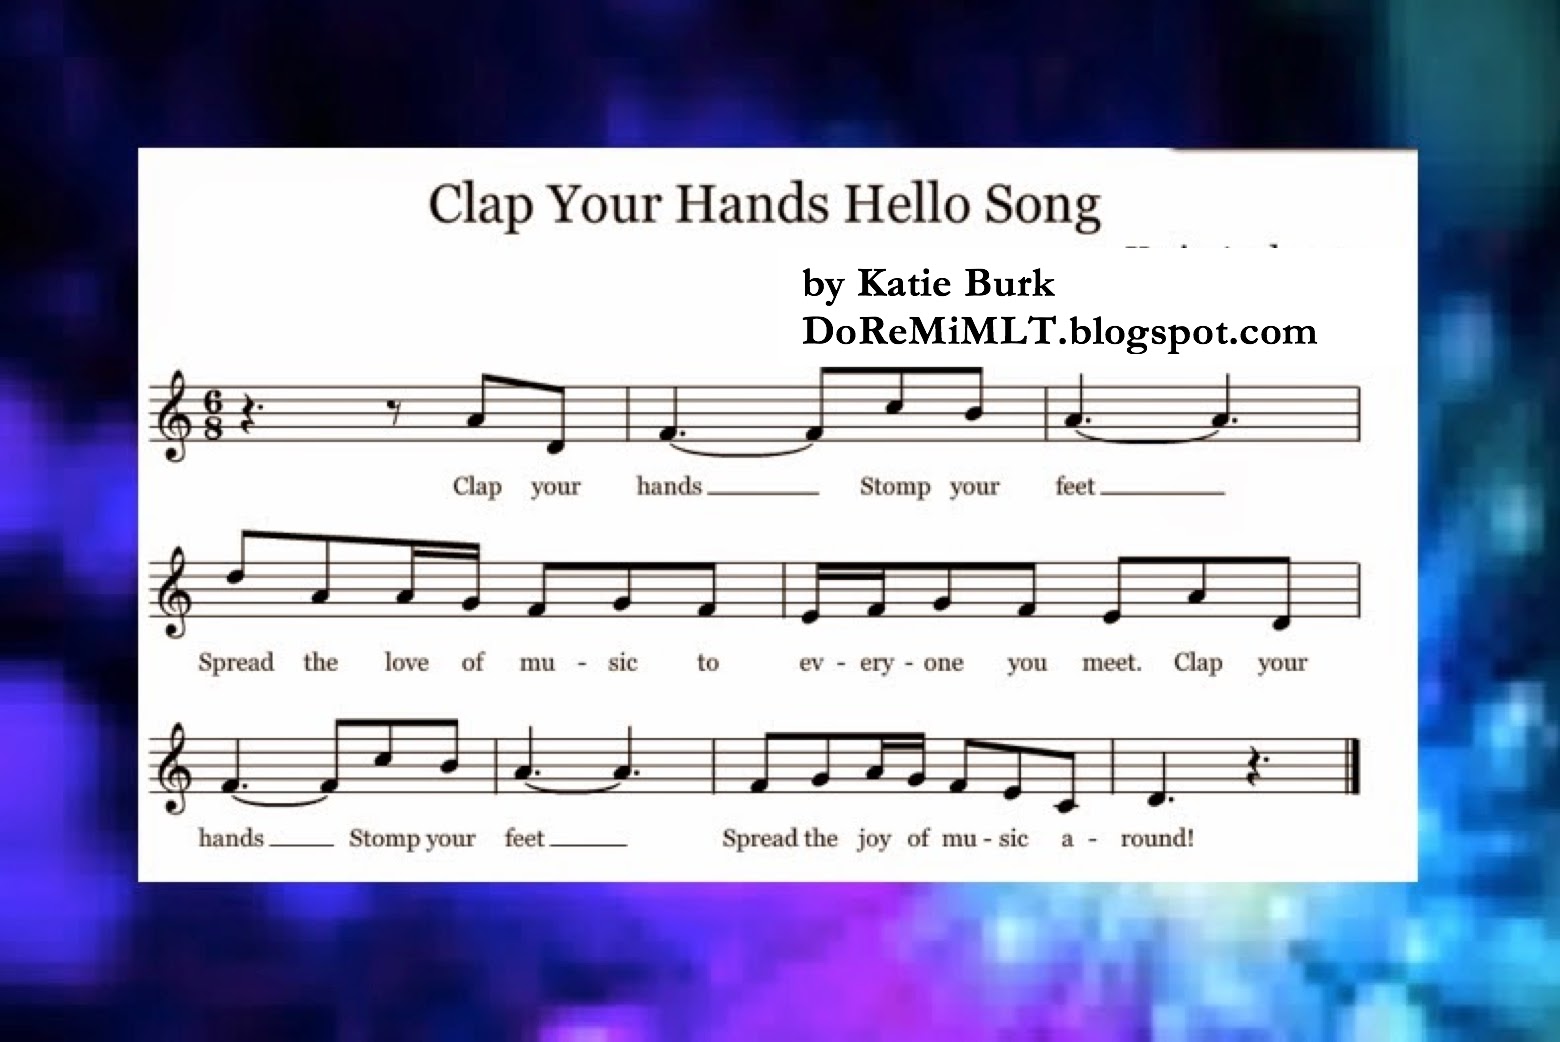 Can you clap your hands. Песенка hello. Песня hello hello hello. Песня Clap Clap. Hello can you Clap your hands super simple Songs.